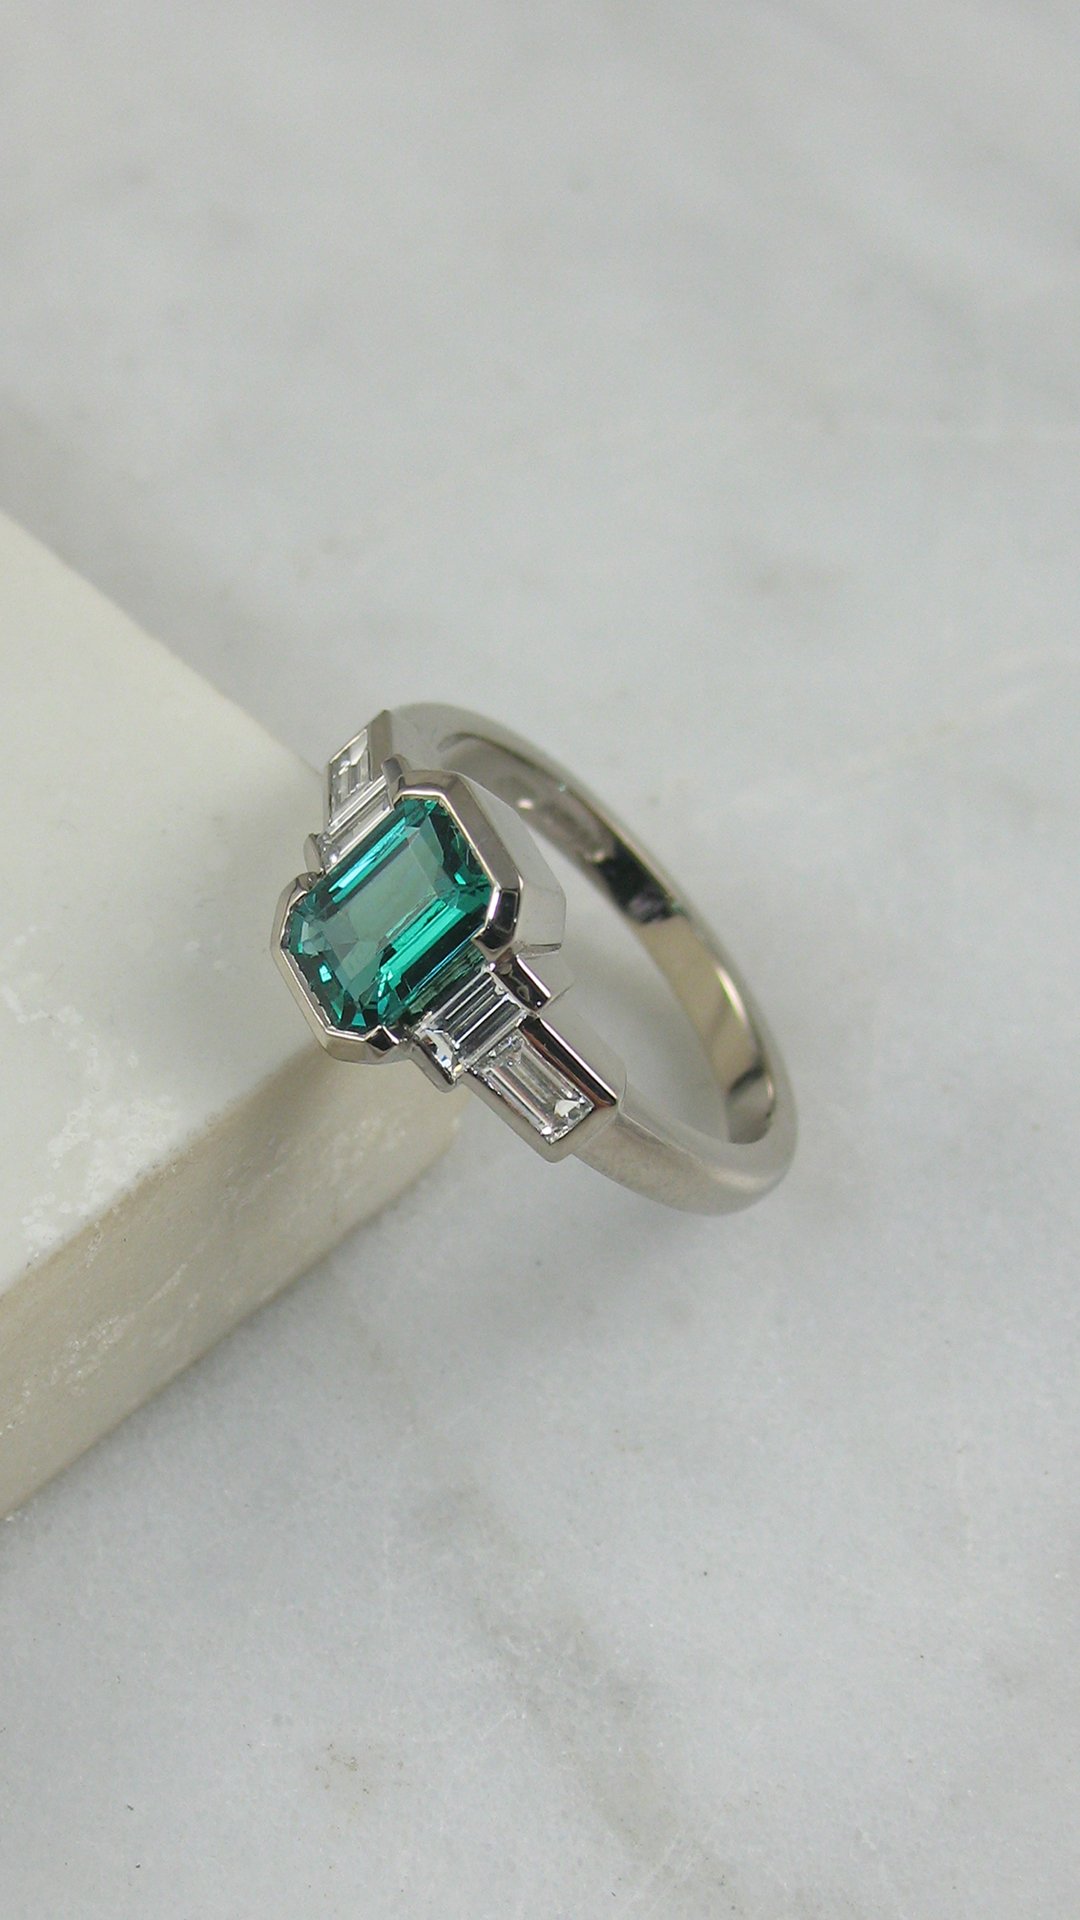 A gorgeous bespoke emerald engagement ring